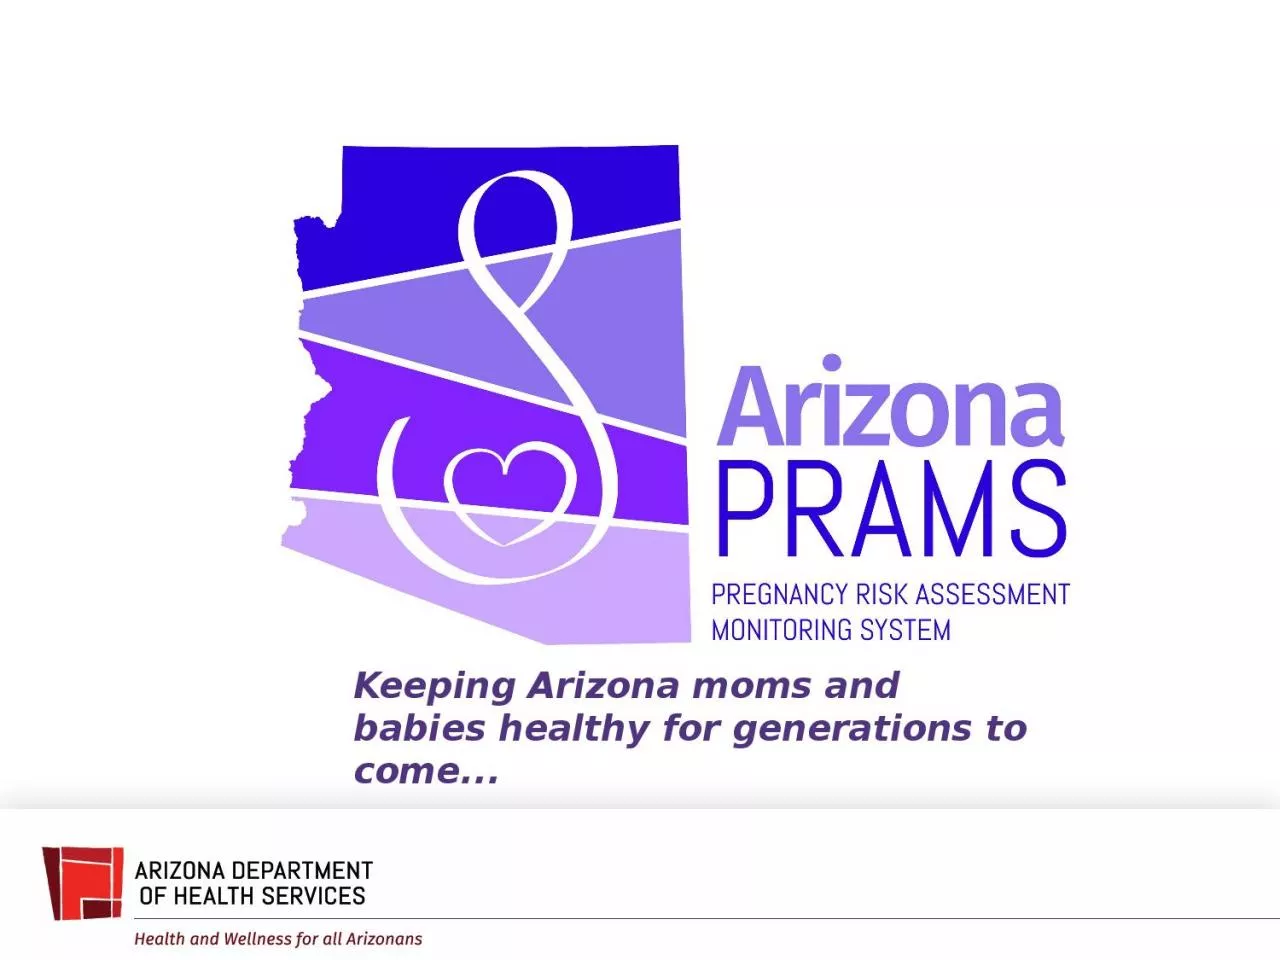 Keeping Arizona moms and babies healthy for generations to come...